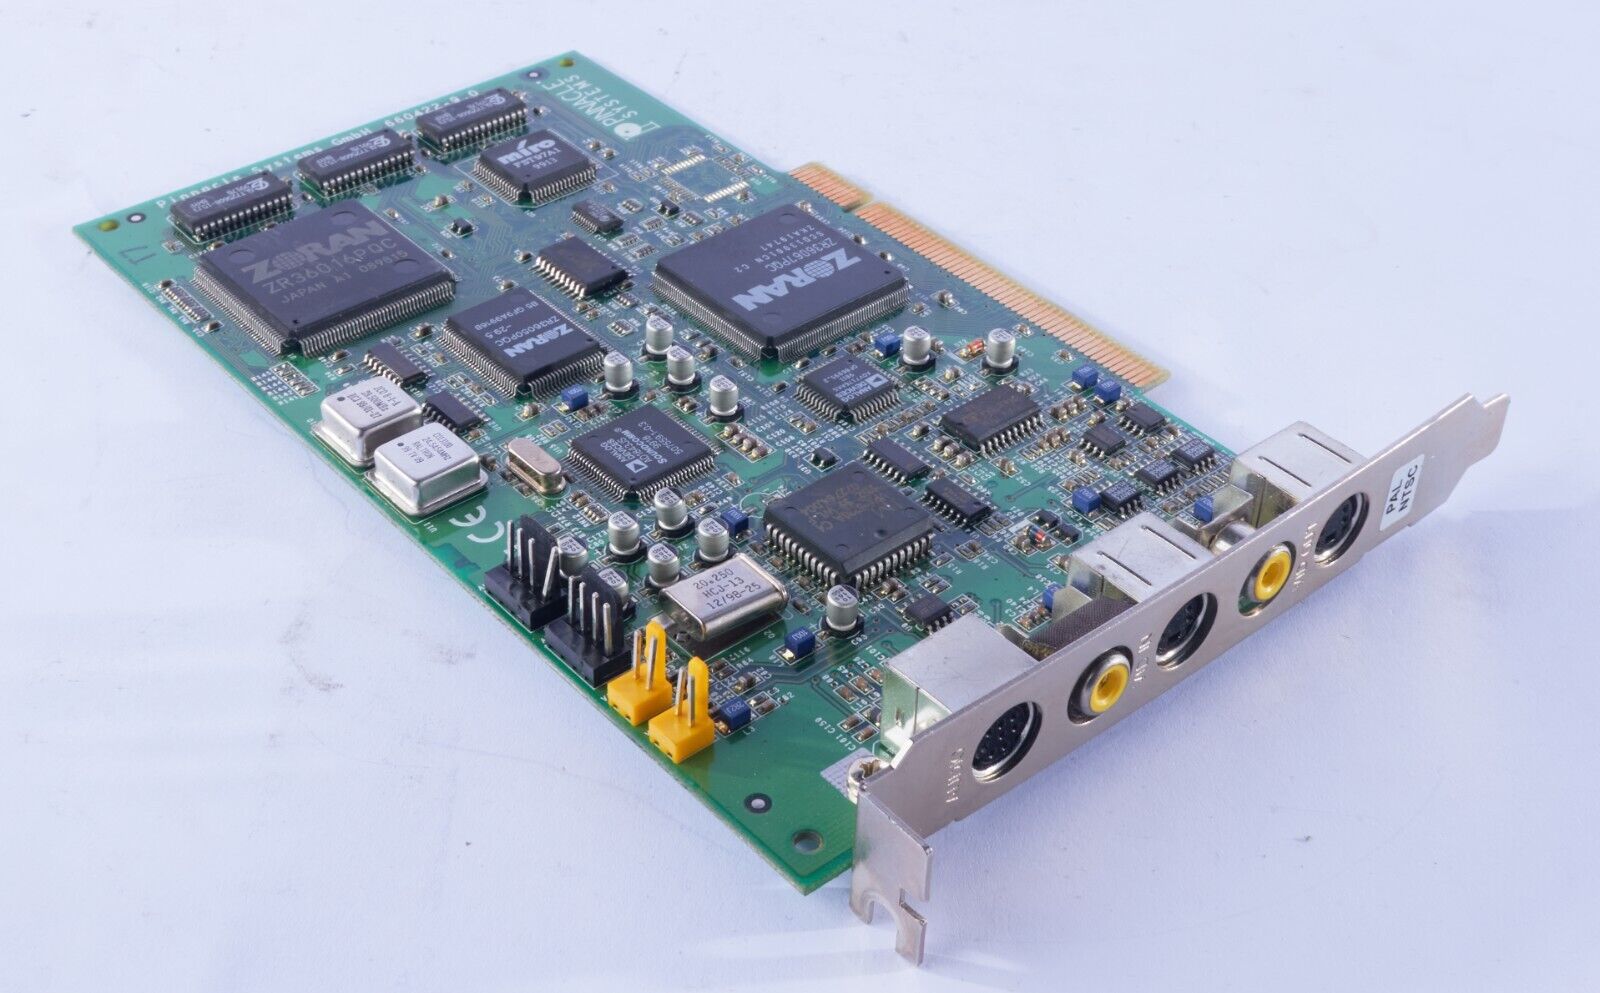 Vintage Pinnacle Systems miroVideo DC30plus 660442-9.0 Capture Card PCI